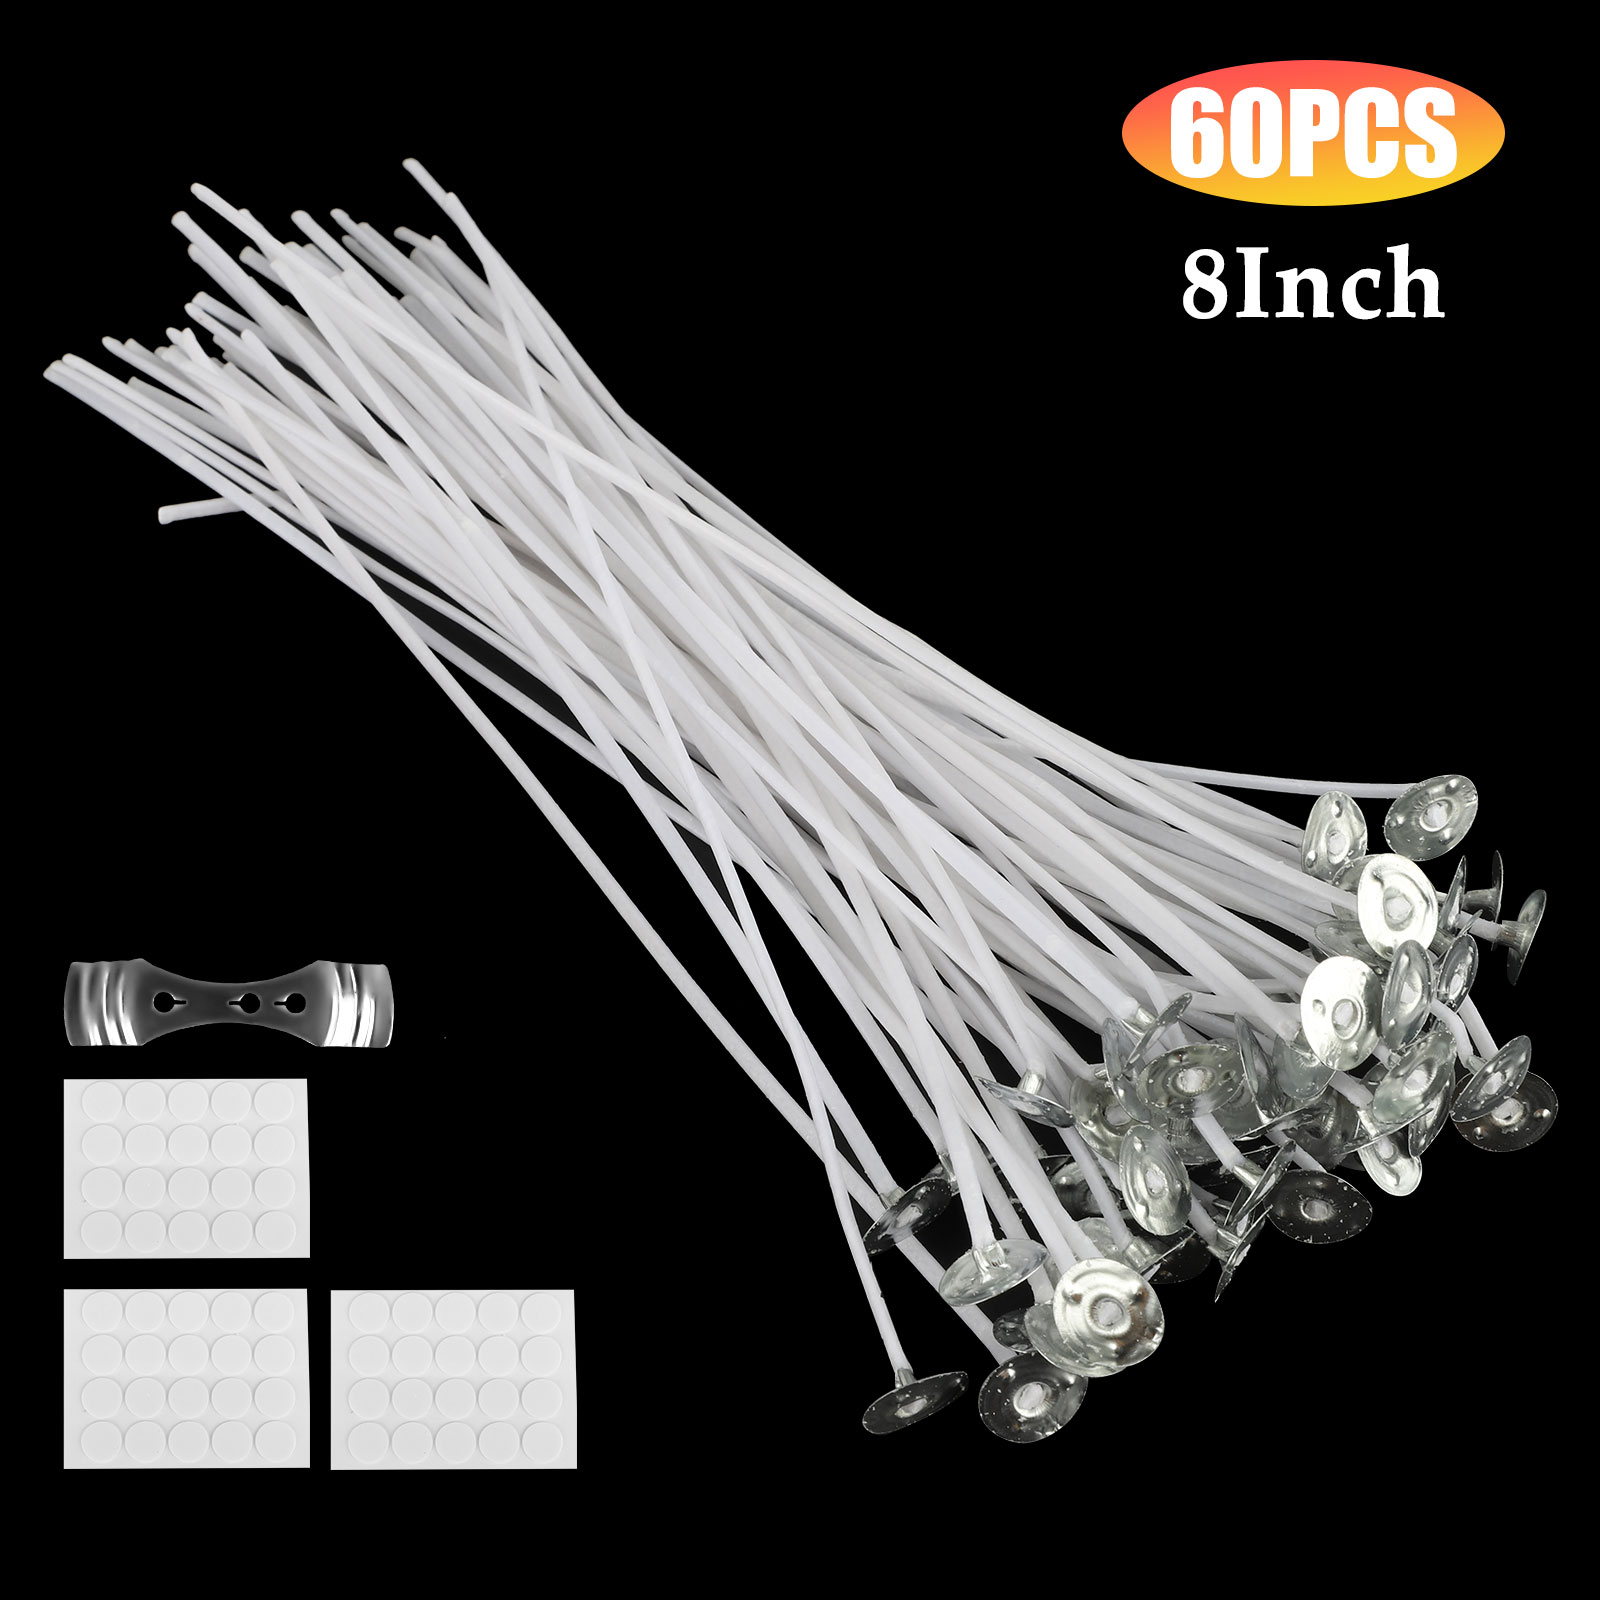 thumbnail 15 - 60/120 PCS 8 Inch Candle Wicks Pre-Waxed Wick For Cotton Core Candles DIY Making